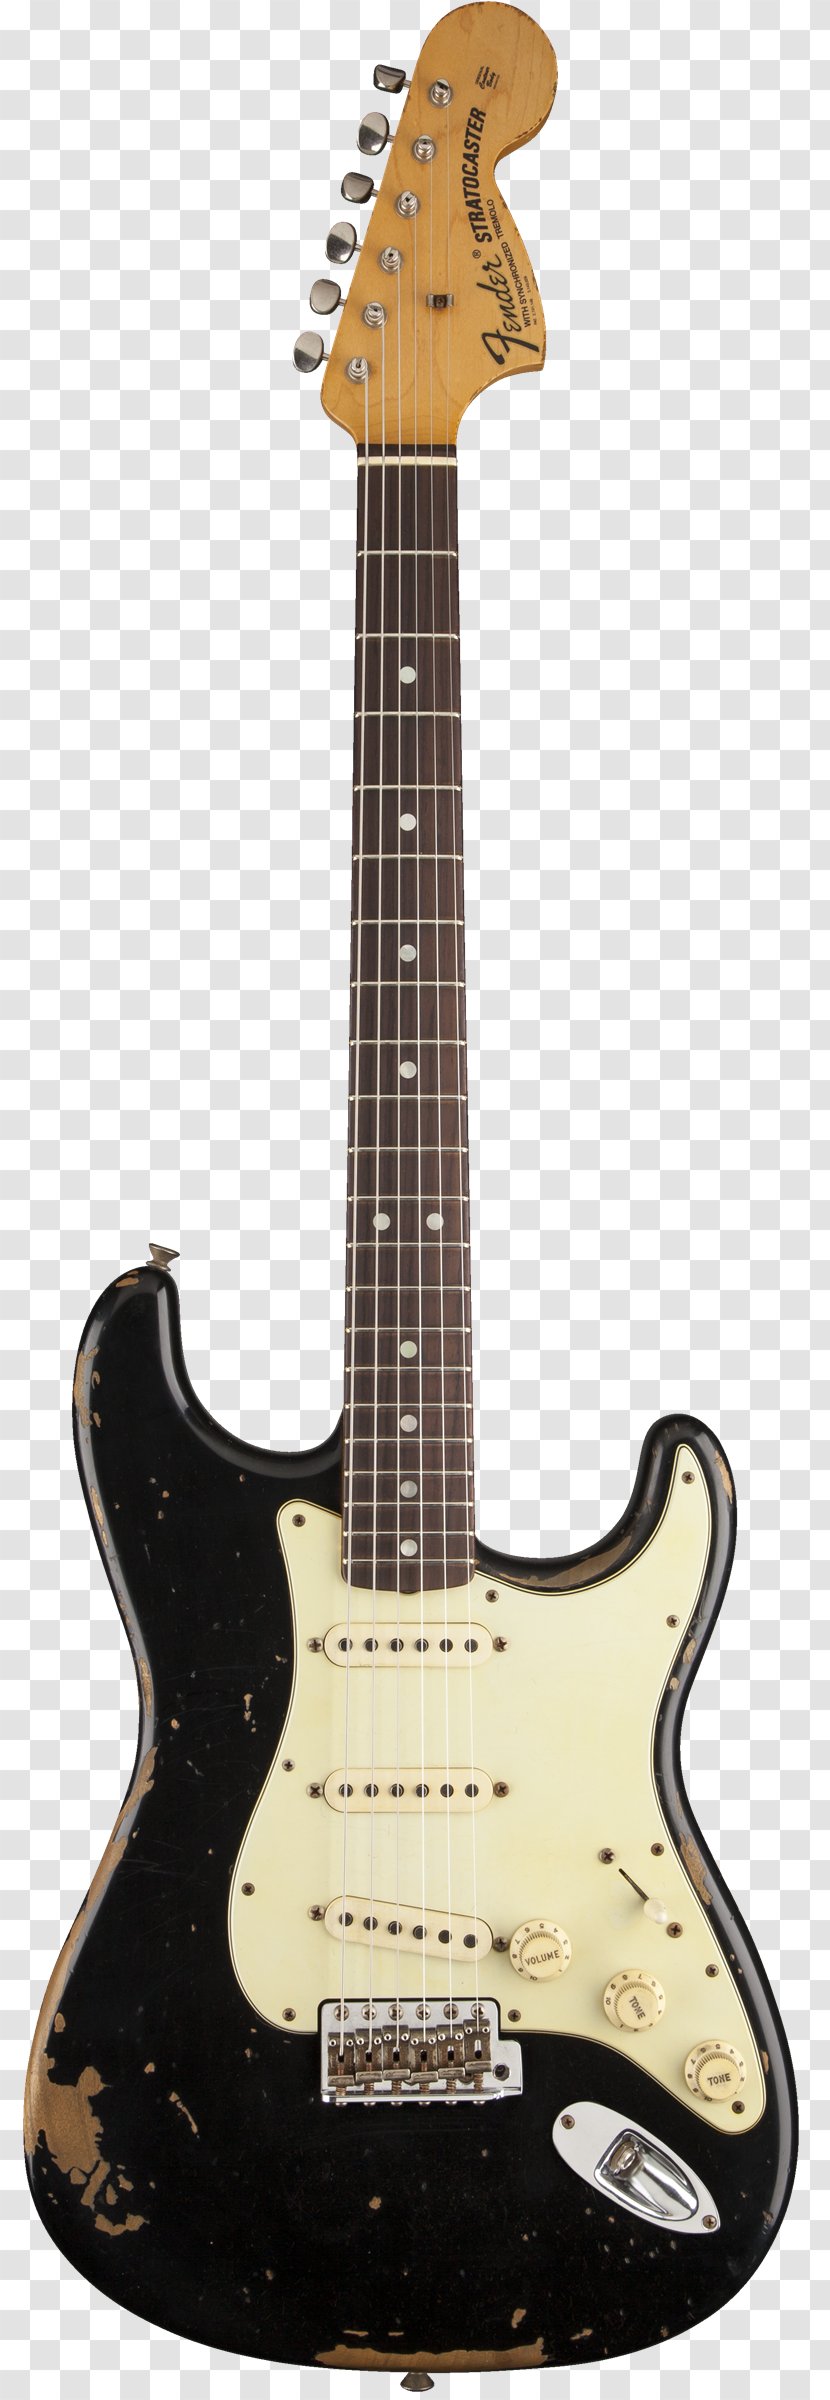 Fender Stratocaster Musical Instruments Corporation Electric Guitar Bullet American Deluxe Series - Slide Transparent PNG